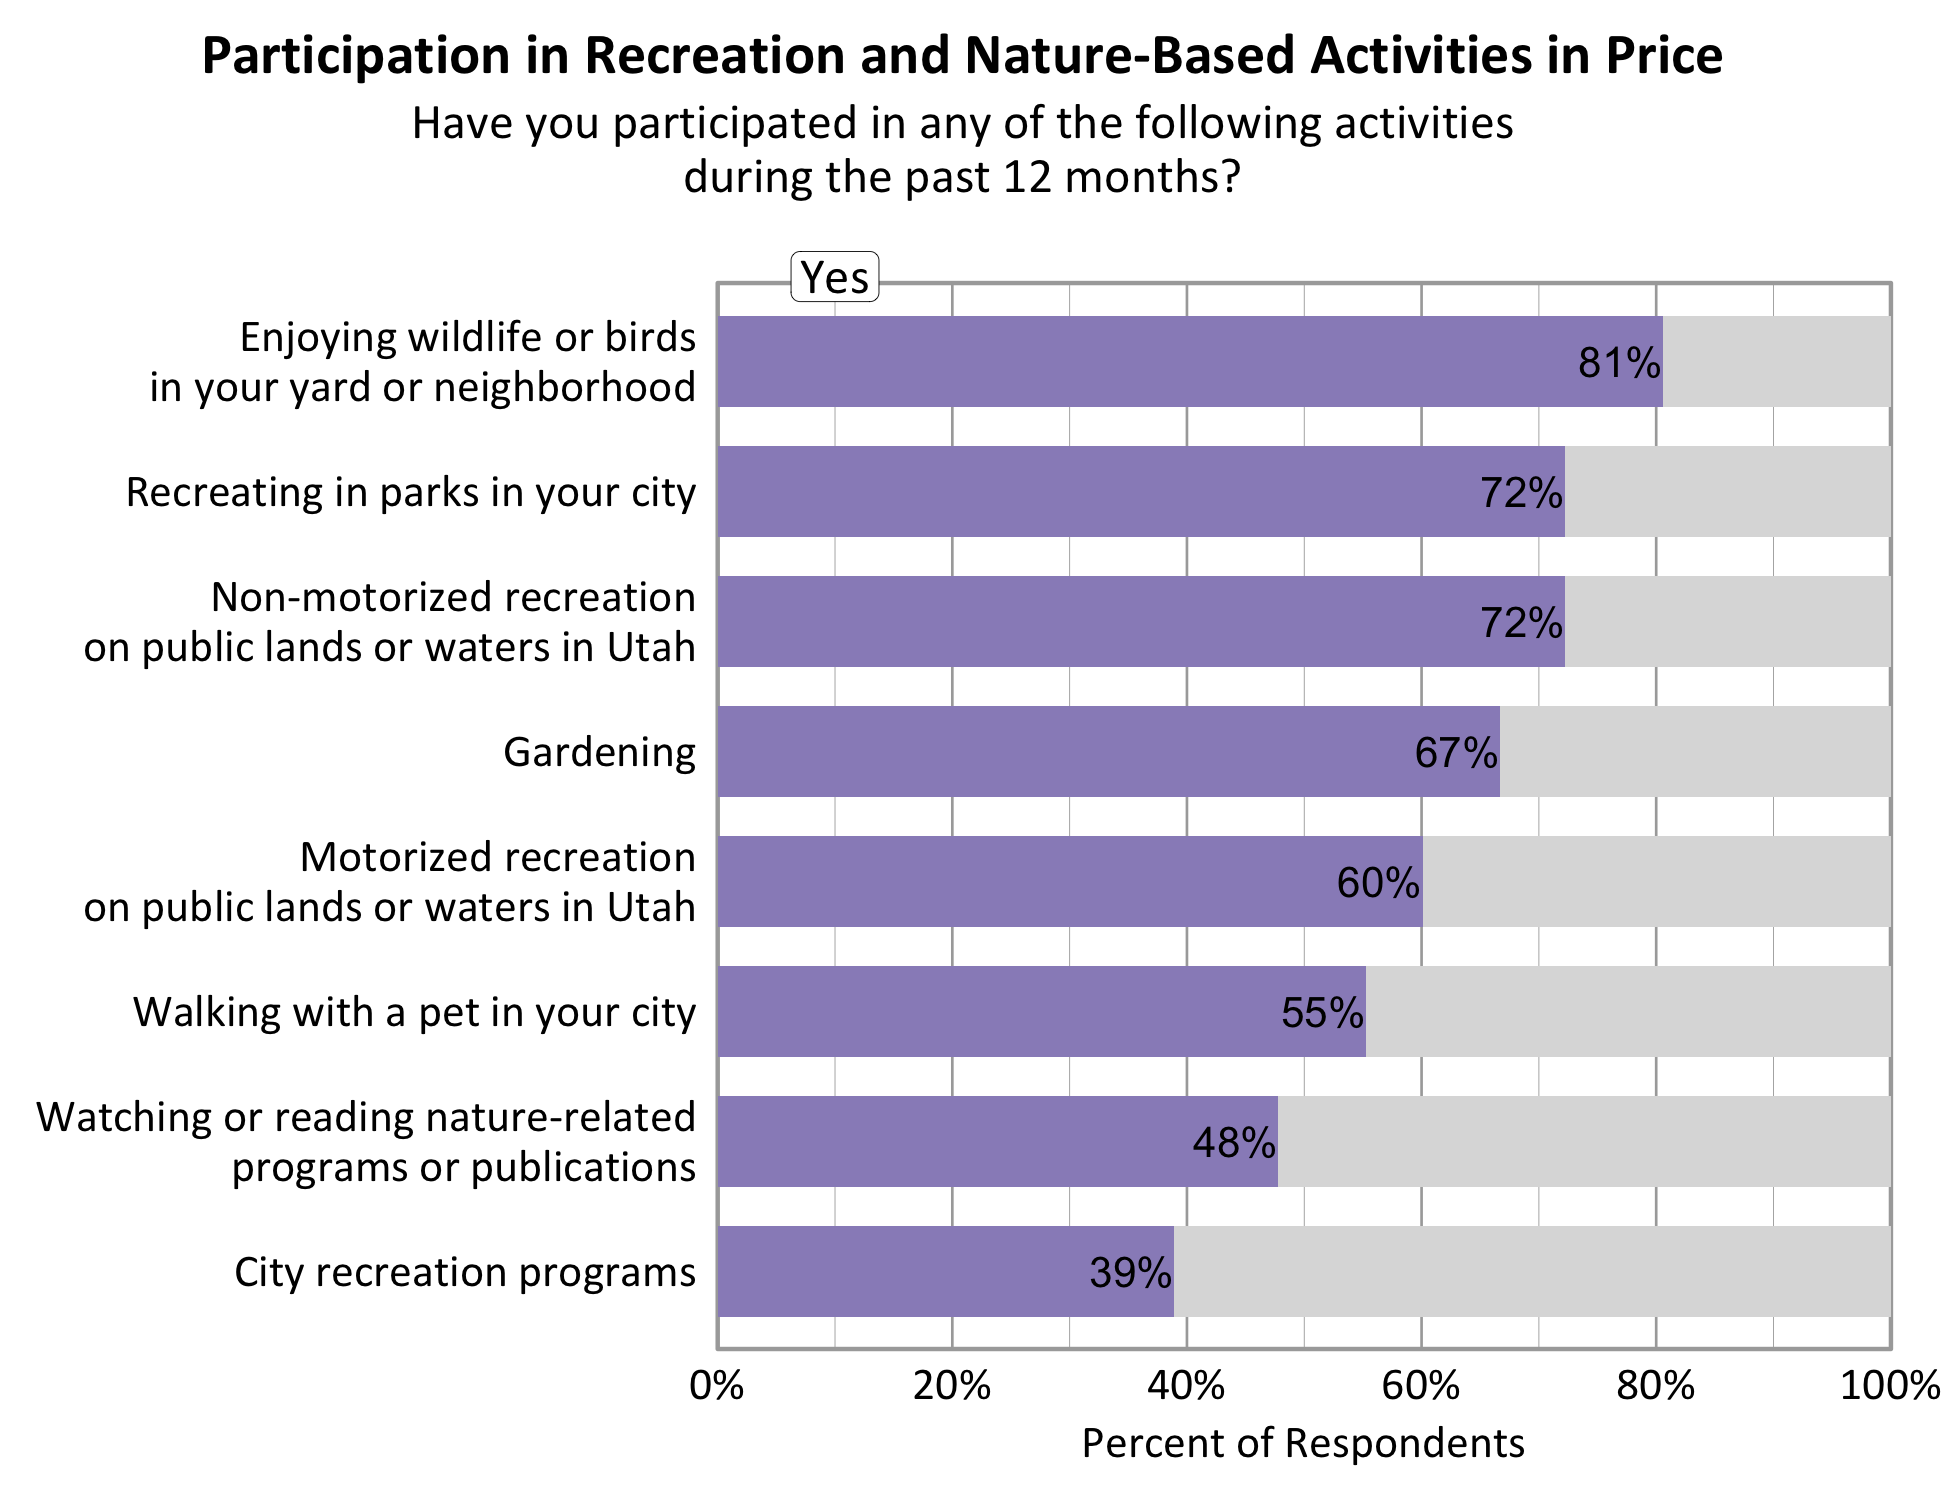 Type: Bar Graph Title: Participation in Recreation and Nature-based Activities in Price. Subtitle: Have you participated in any of the following activities during the past 12 months? Data - 72% of respondents indicated yes to non-motorized recreation on public lands or waters in Utah. 81% of respondents indicated yes to enjoying wildlife or birds in your yard or neighborhood. 60% of respondents indicated yes to motorized recreation on public lands or waters in Utah. 72% of respondents indicated yes to recreating in parks in your city. 67% of respondents indicated yes to gardening. 39% of respondents indicated yes to city recreation programs. 48% of respondents indicated yes to watching or reading nature-related programs or publications. 55% of respondents indicated yes to walking with a pet in your city.